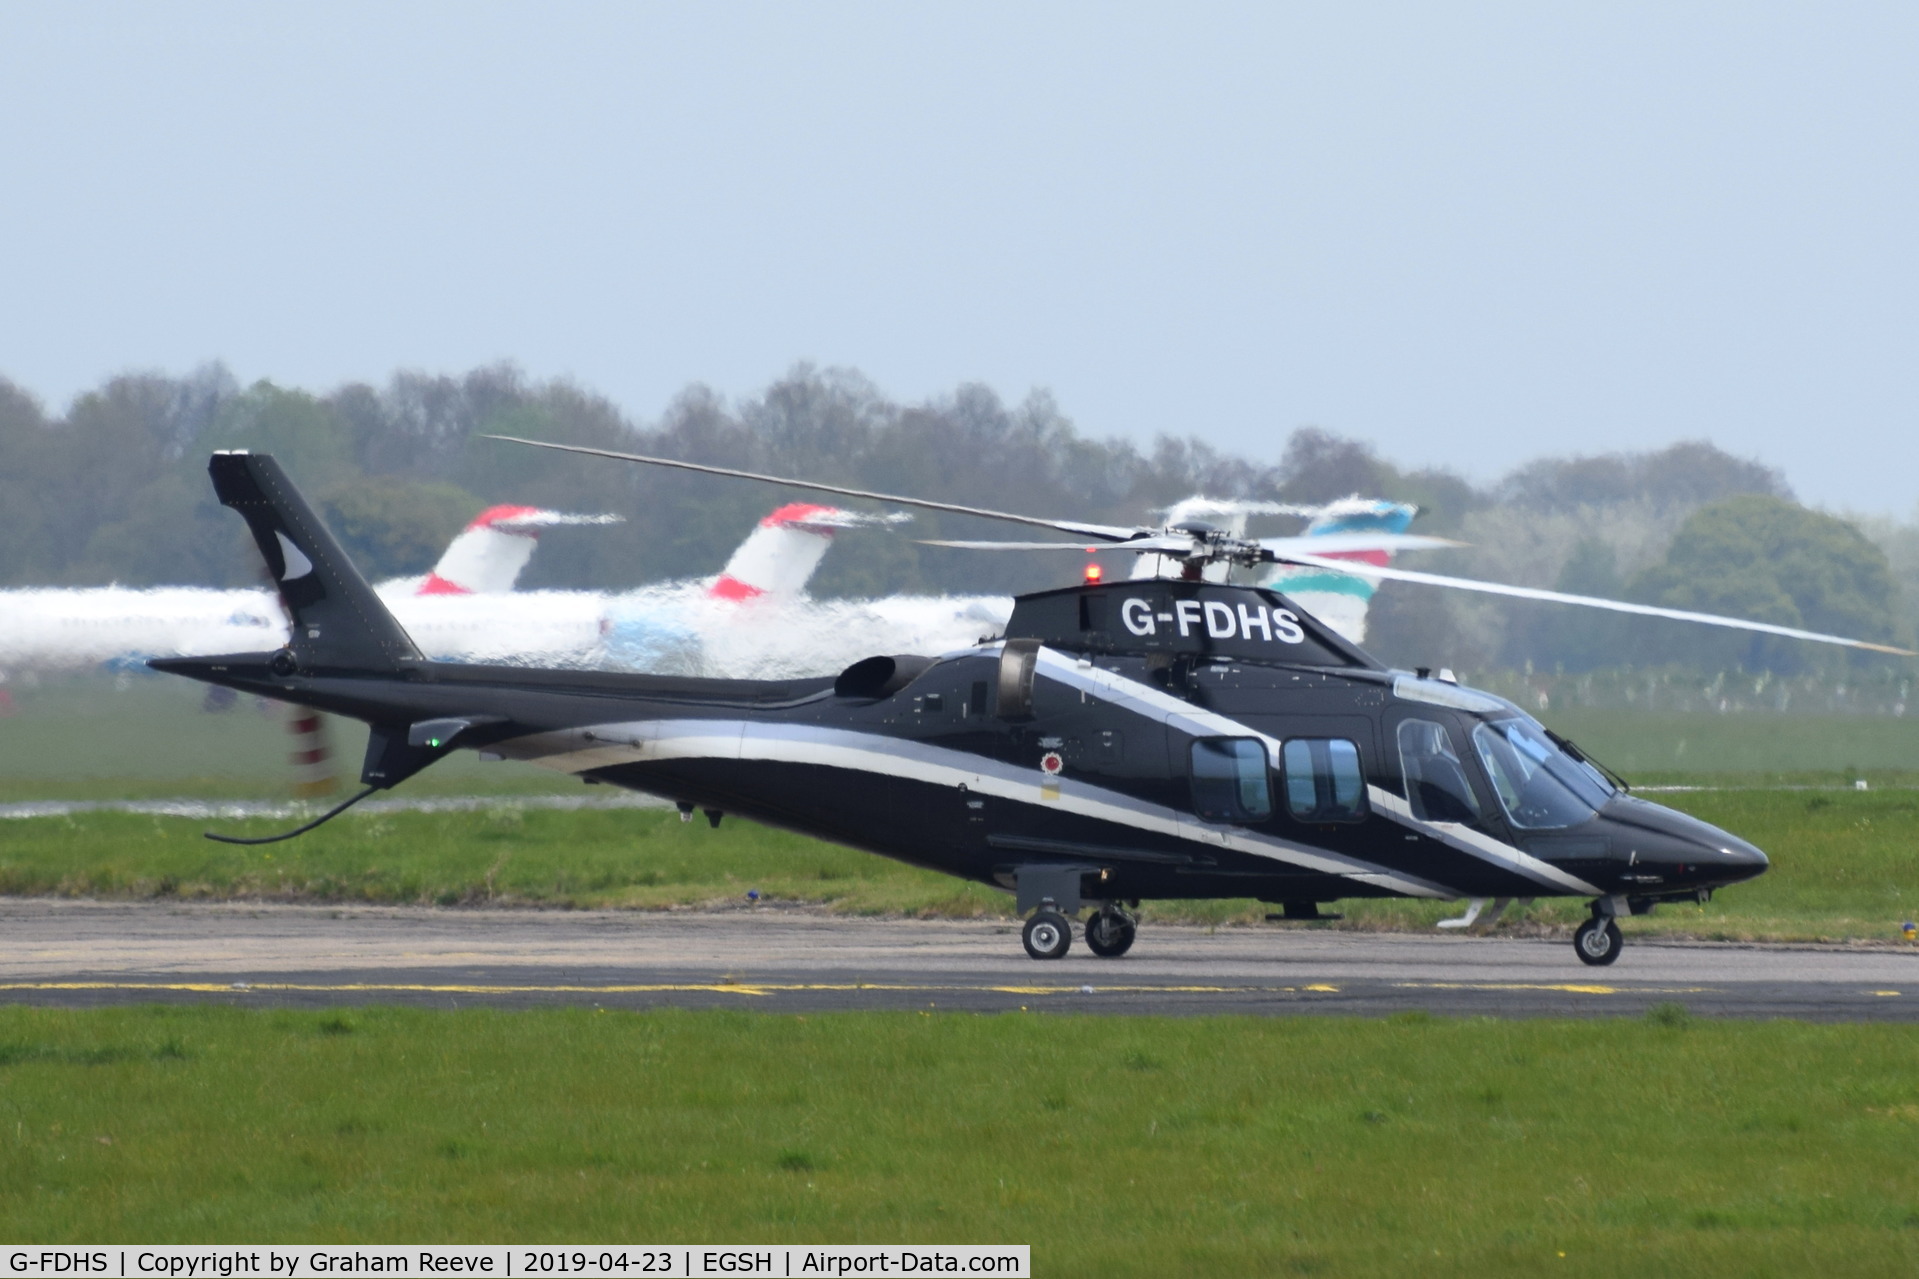 G-FDHS, 2018 Leonardo AW-109SP Grand New C/N 22378, Just landed at Norwich.